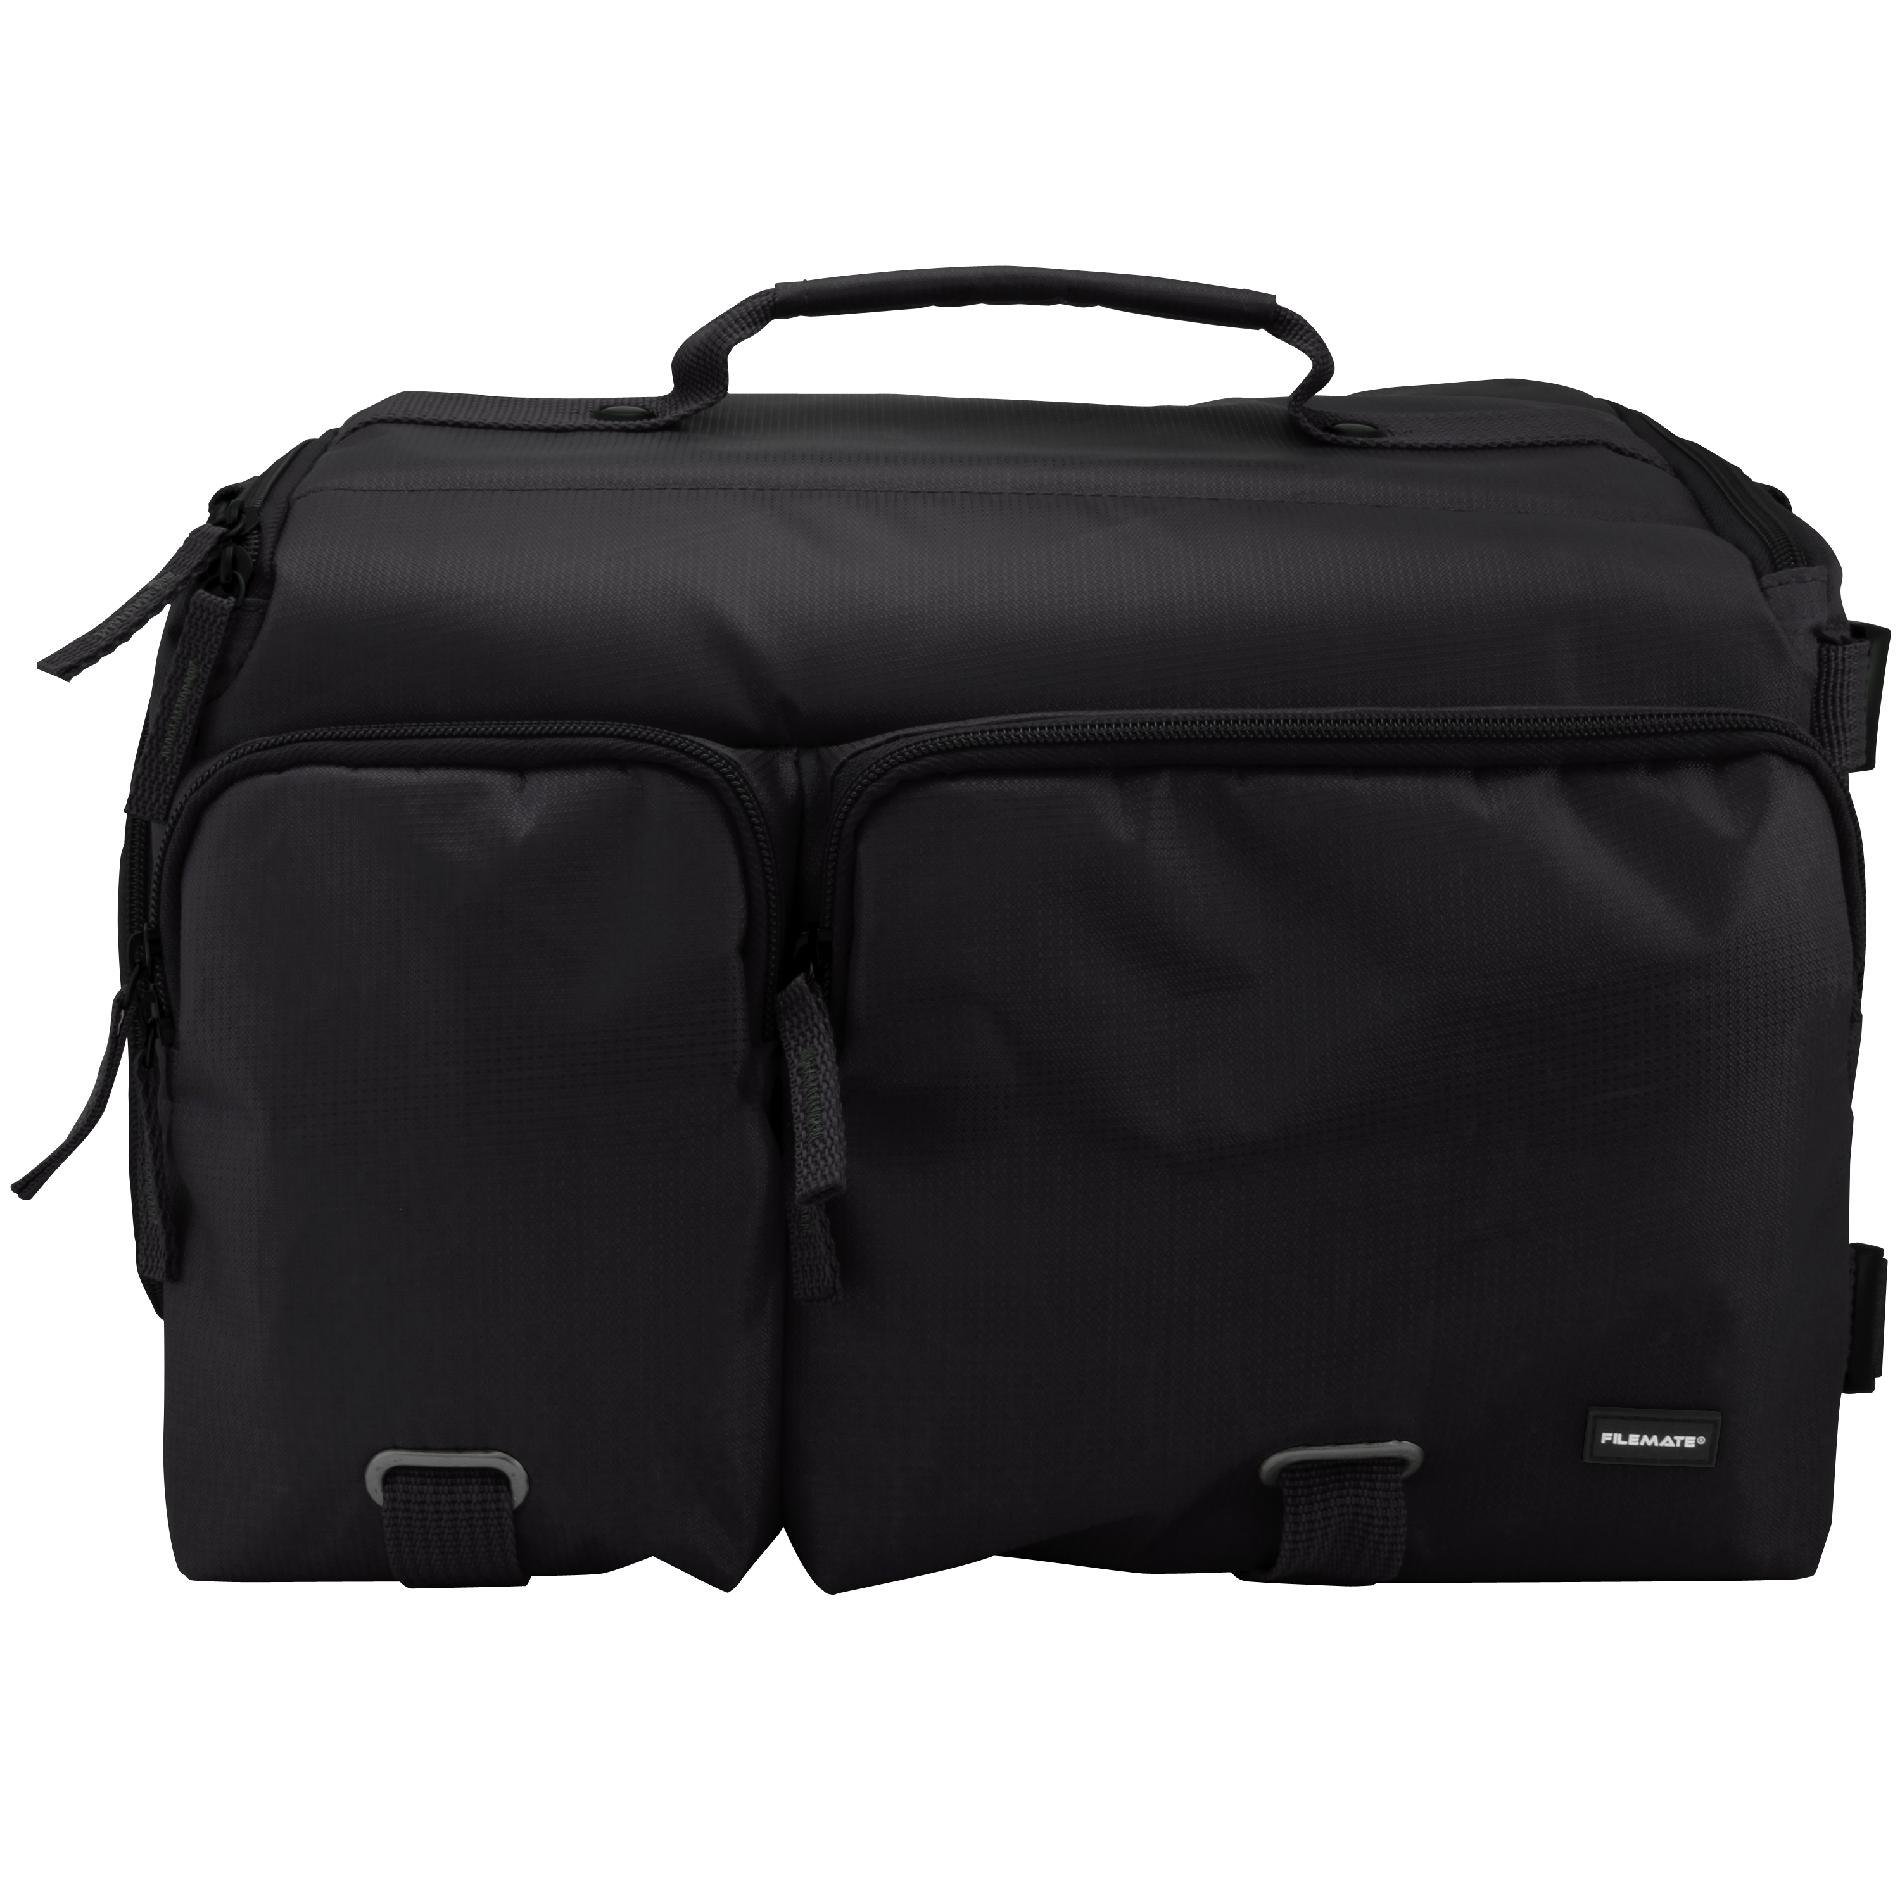 Filemate ECO Professional SLR Camera Bag with Two Front Pockets - Black